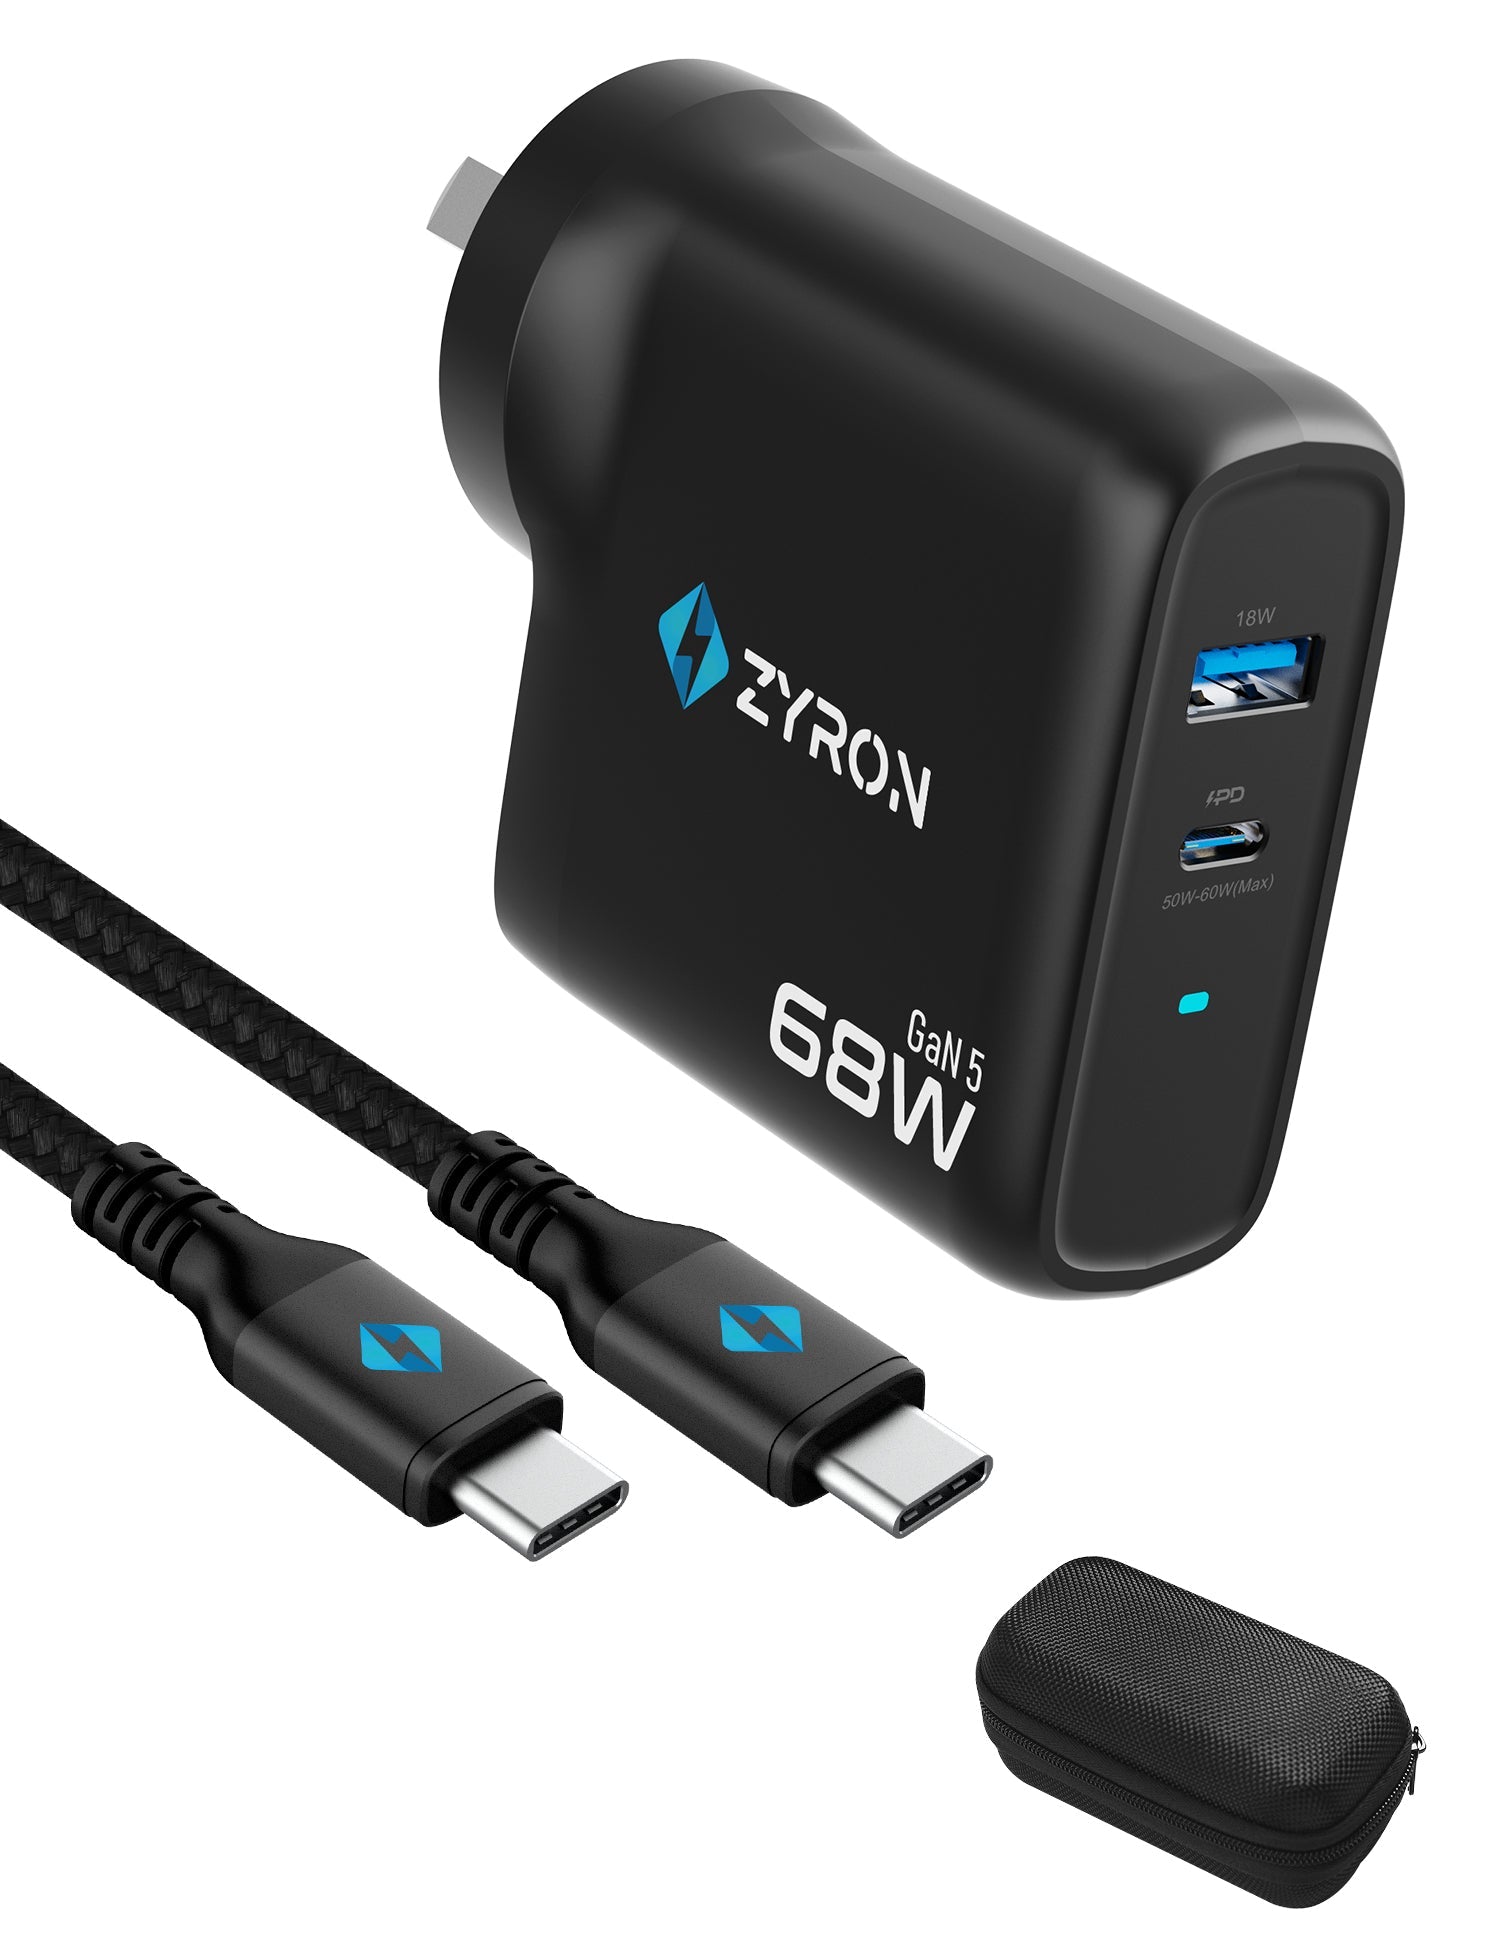 Zyron Powaforce gan charger 68W usb c charger